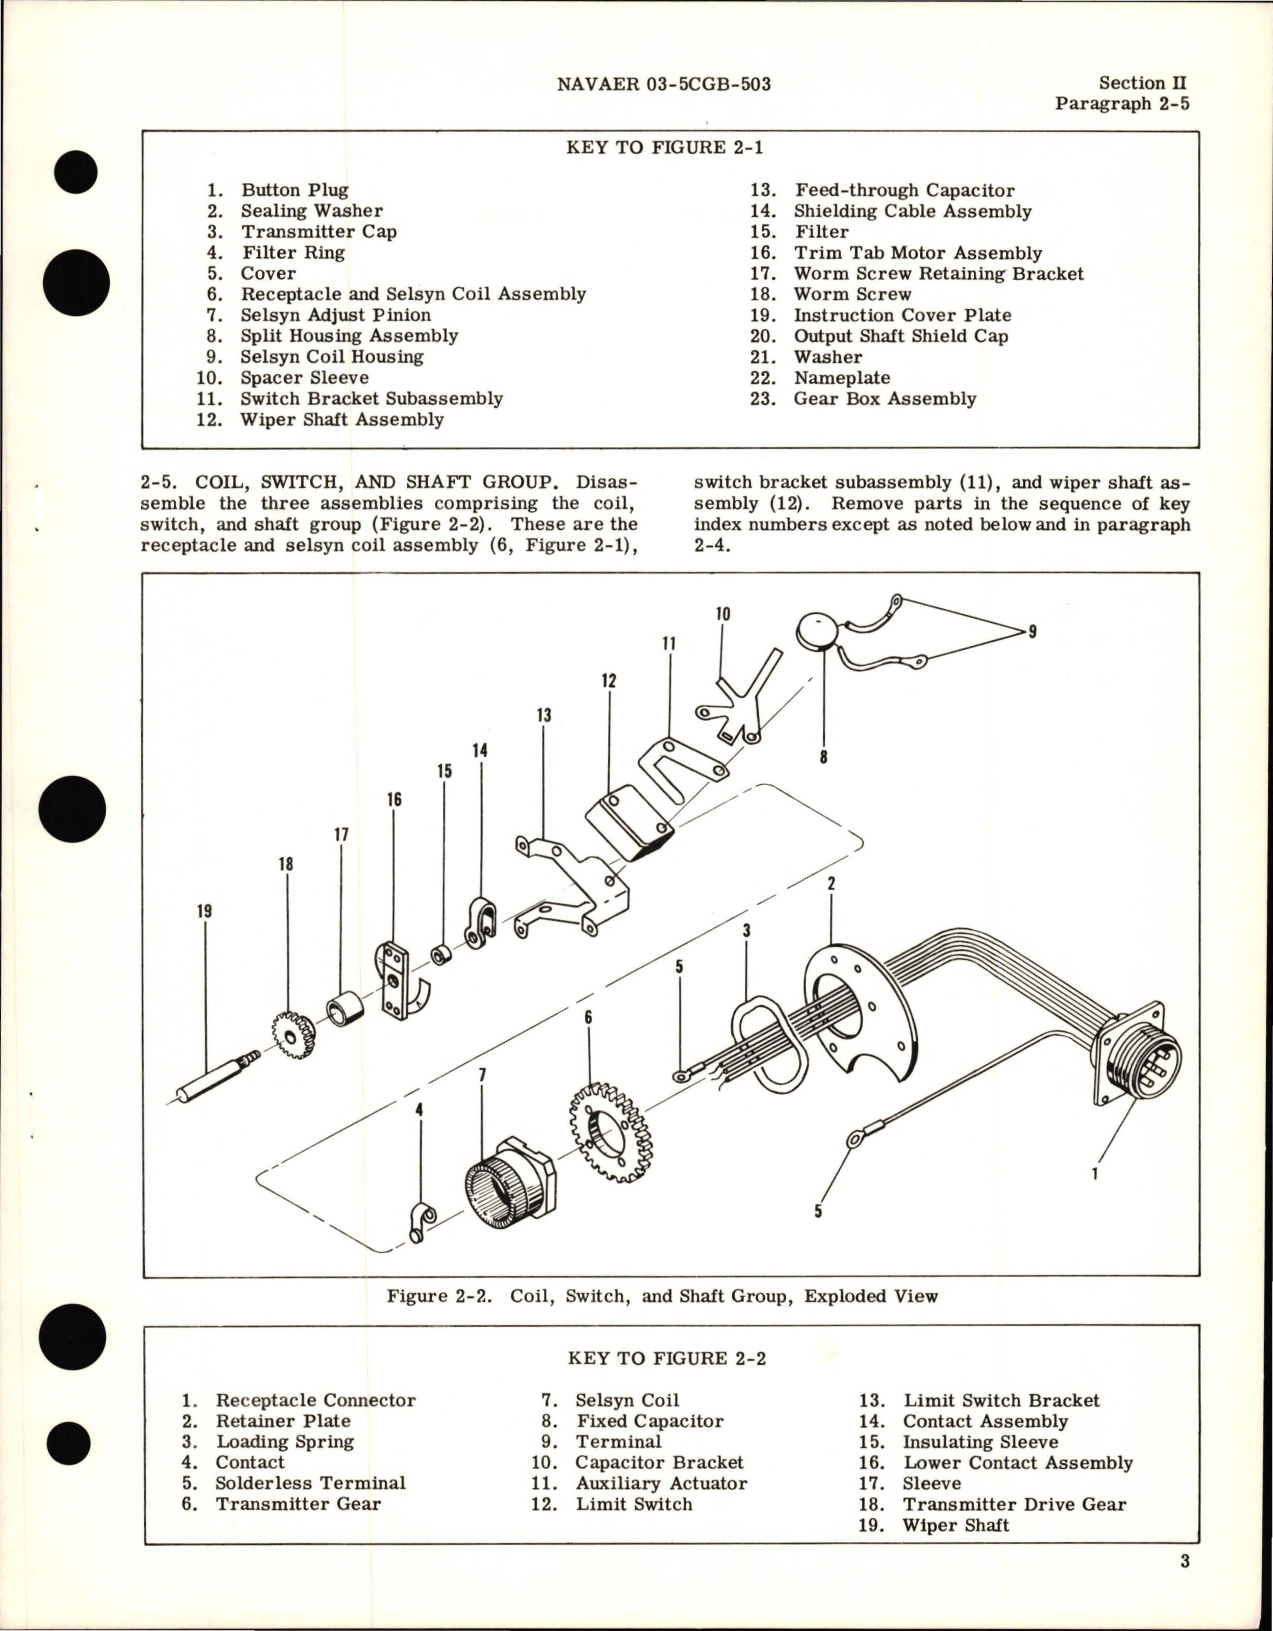 Sample page 7 from AirCorps Library document: Overhaul Instructions for Wing Trim Tab Actuator Model REV-M12 - Part 1100-1-166 